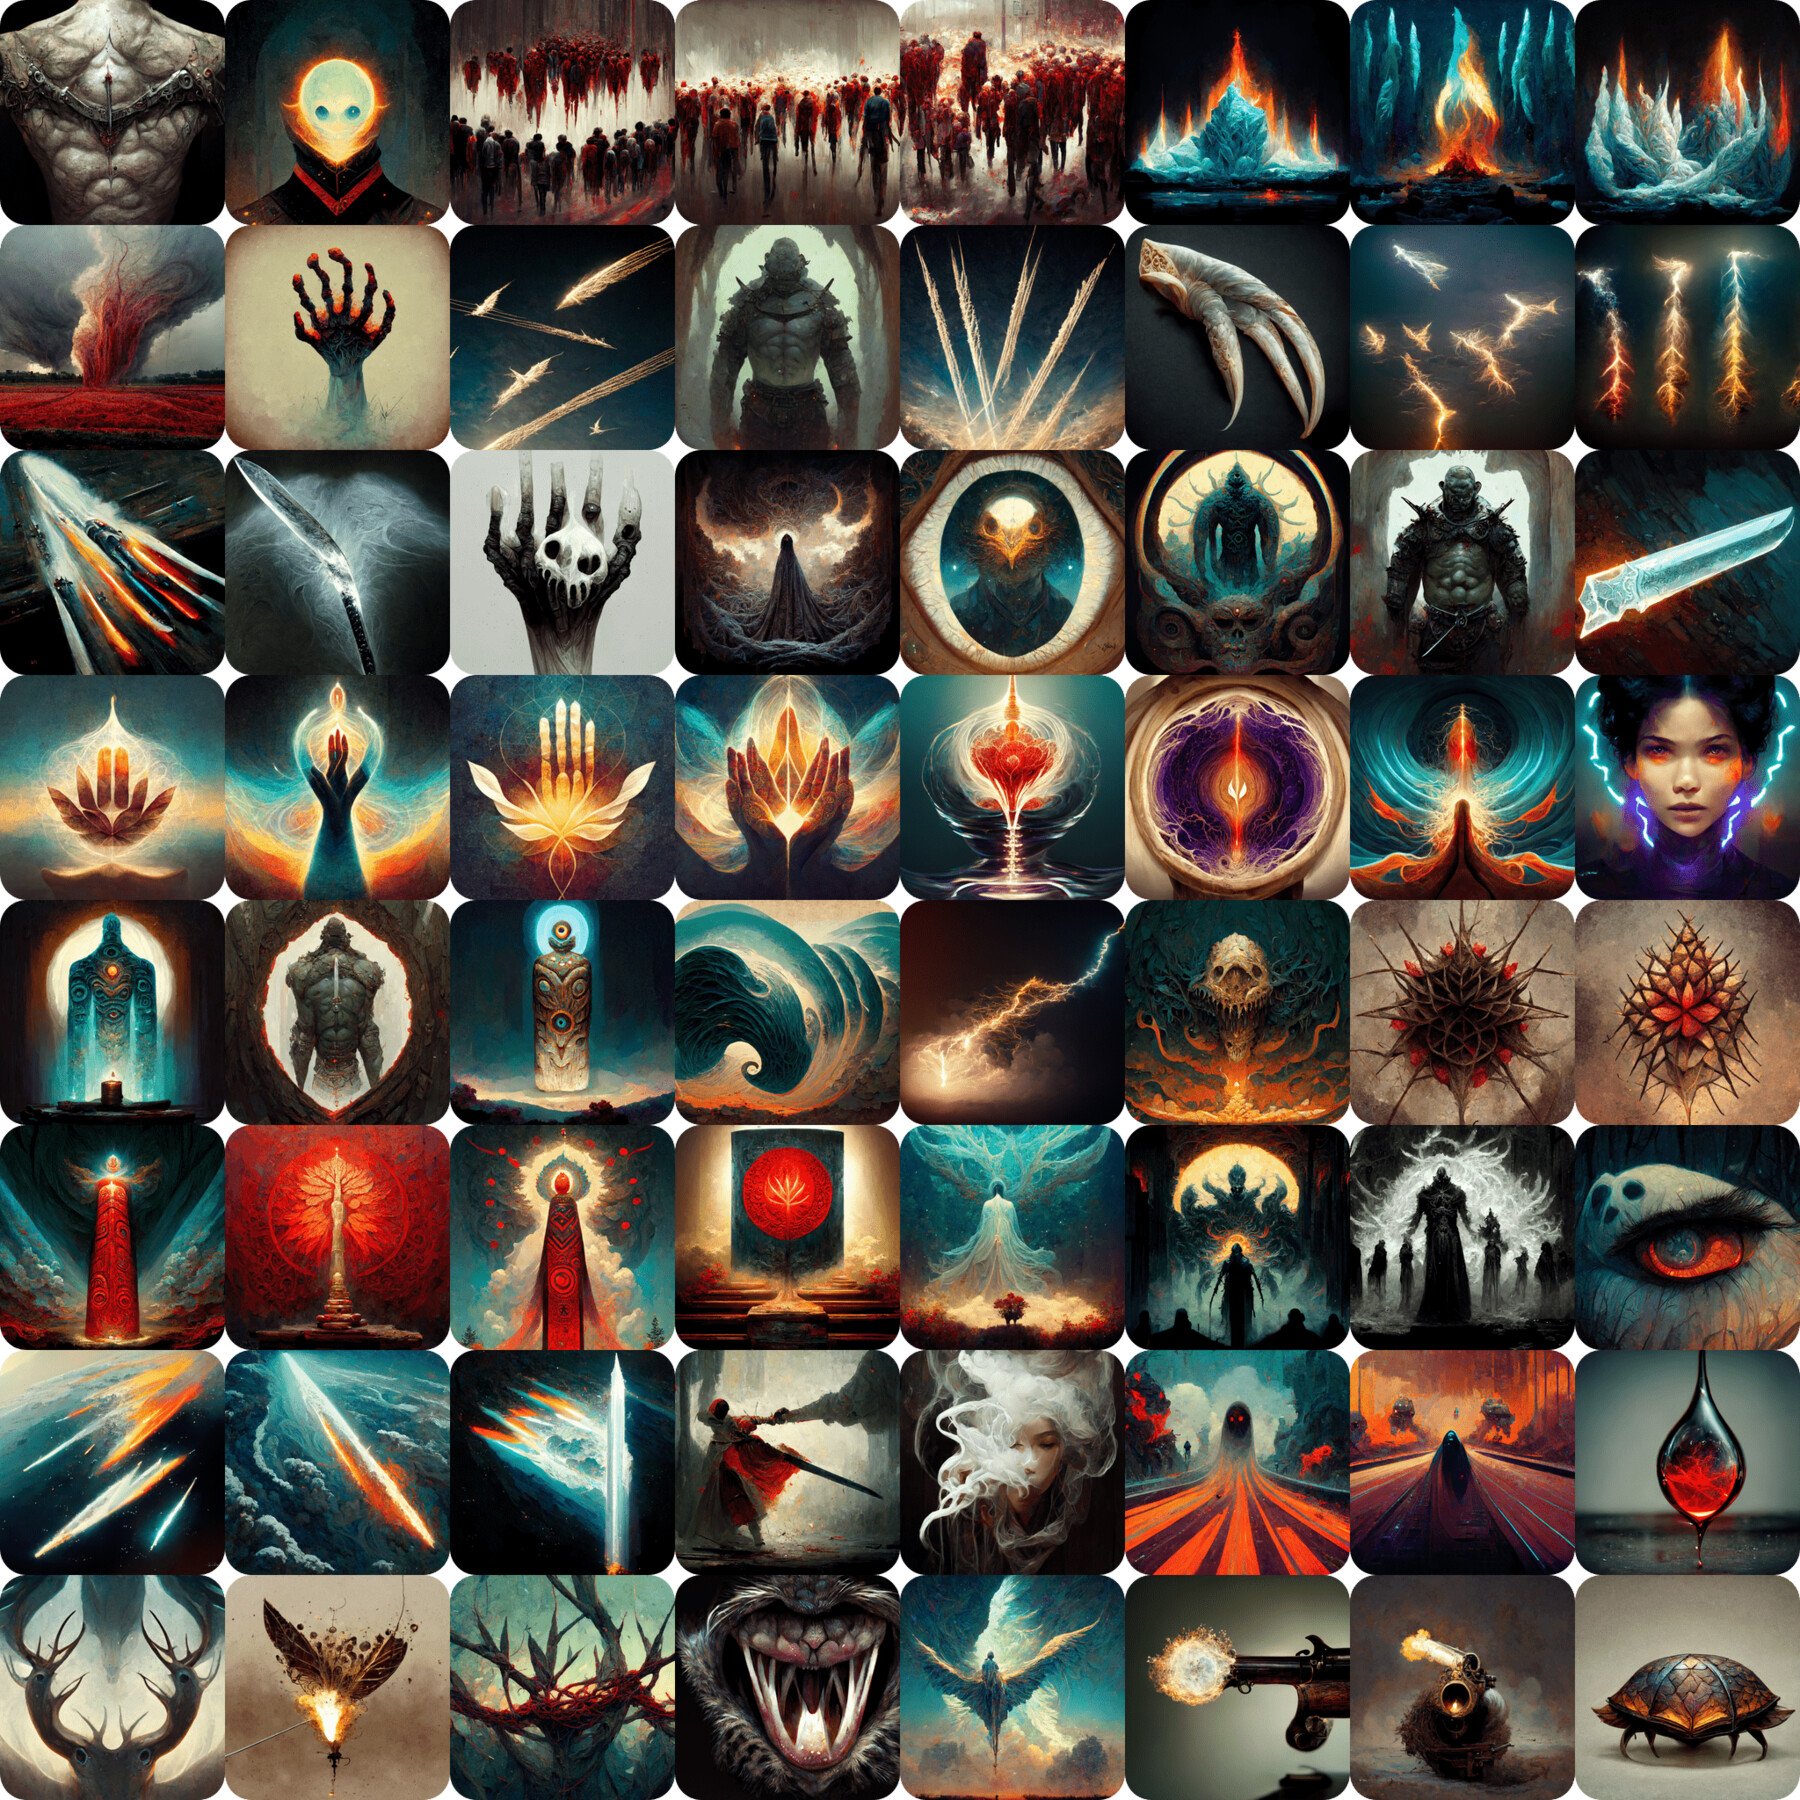 ArtStation - Sci-Fi Ability Icons 04, Game Assets in 2023